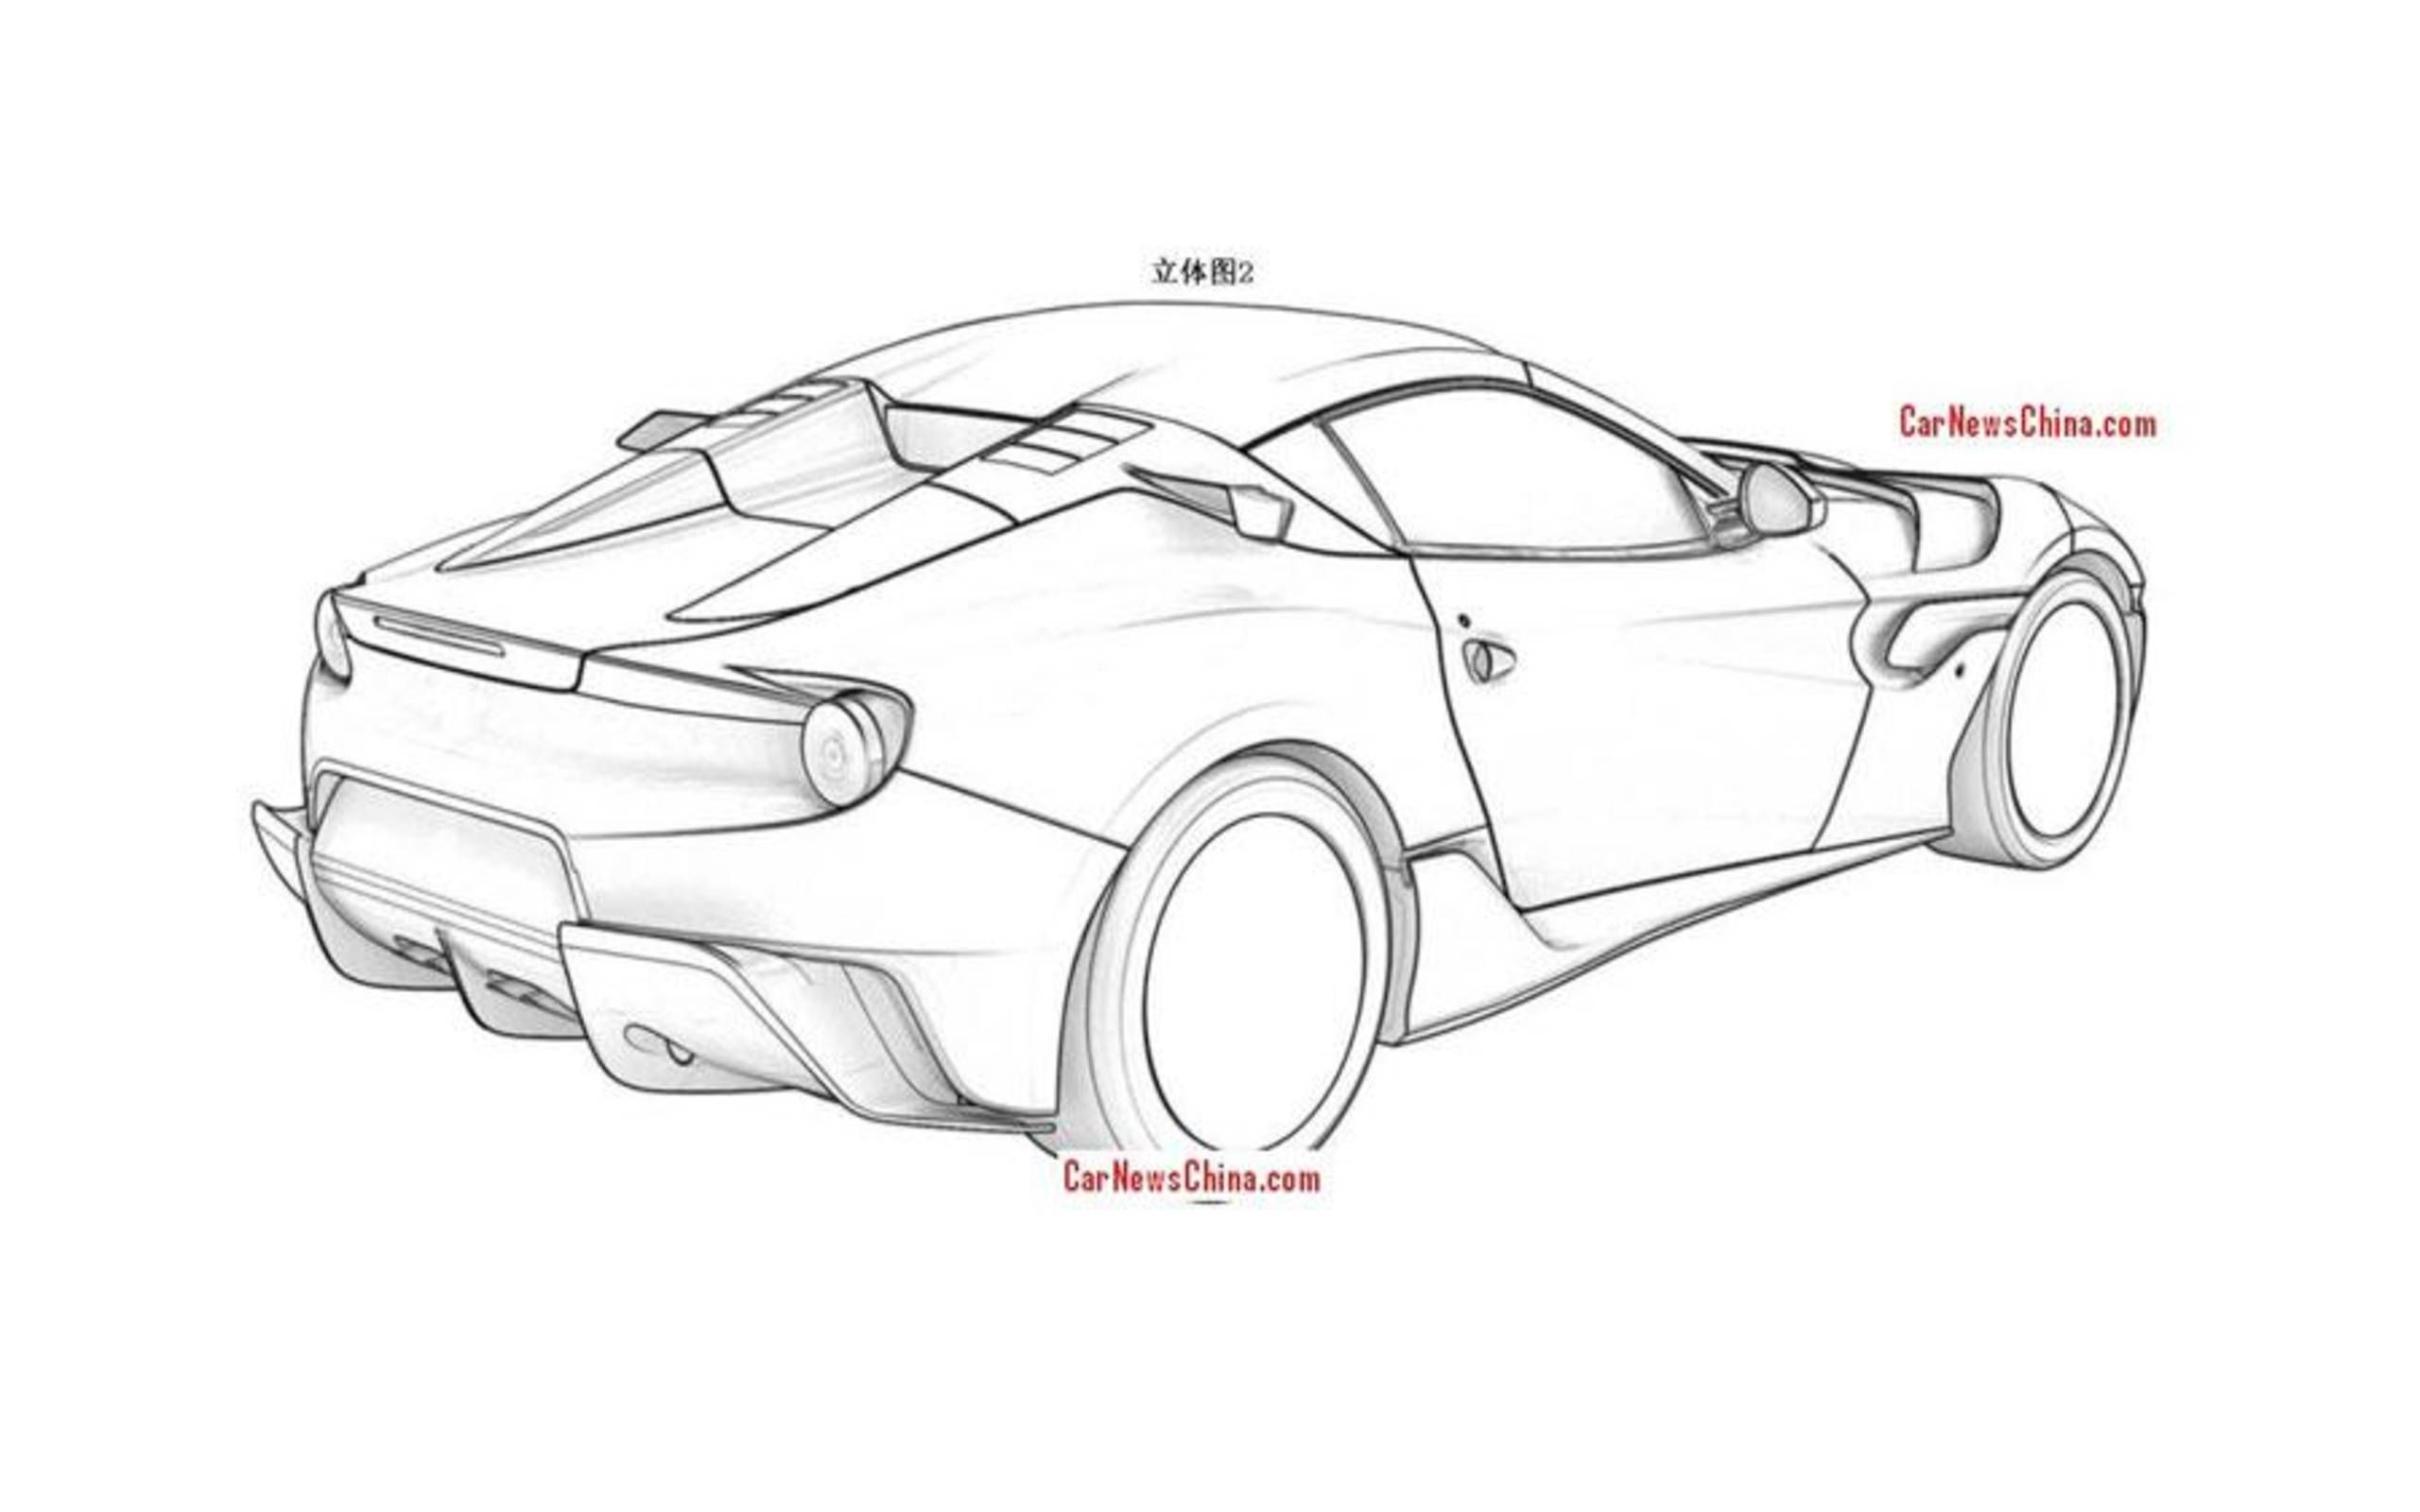 New Ferrari F12 variant leaked in patent drawings